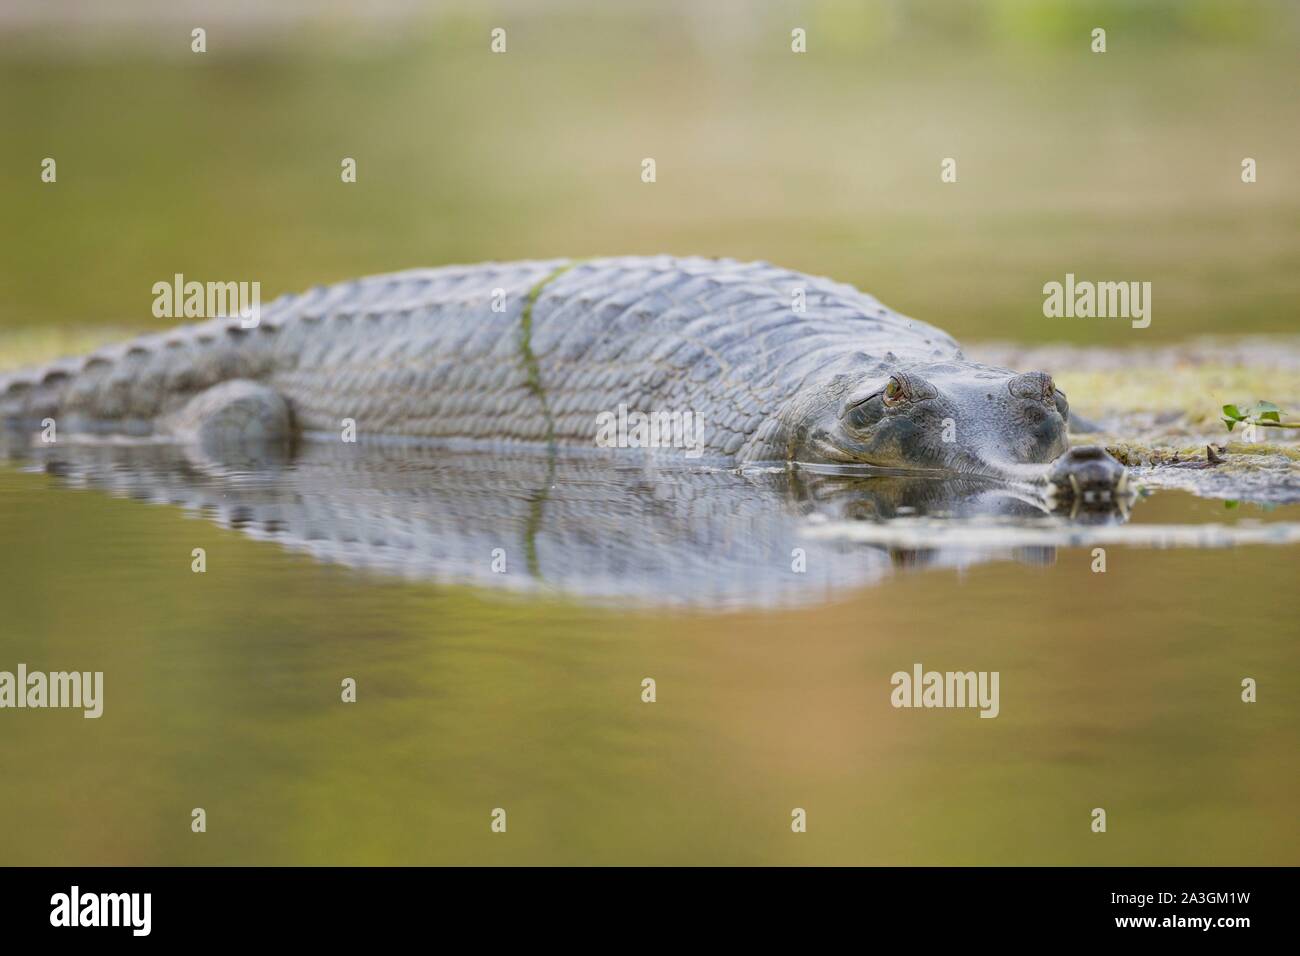 Il Nepal, Chitwan il parco nazionale, Gharial (Gavialis gangeticus) nel fiume Foto Stock